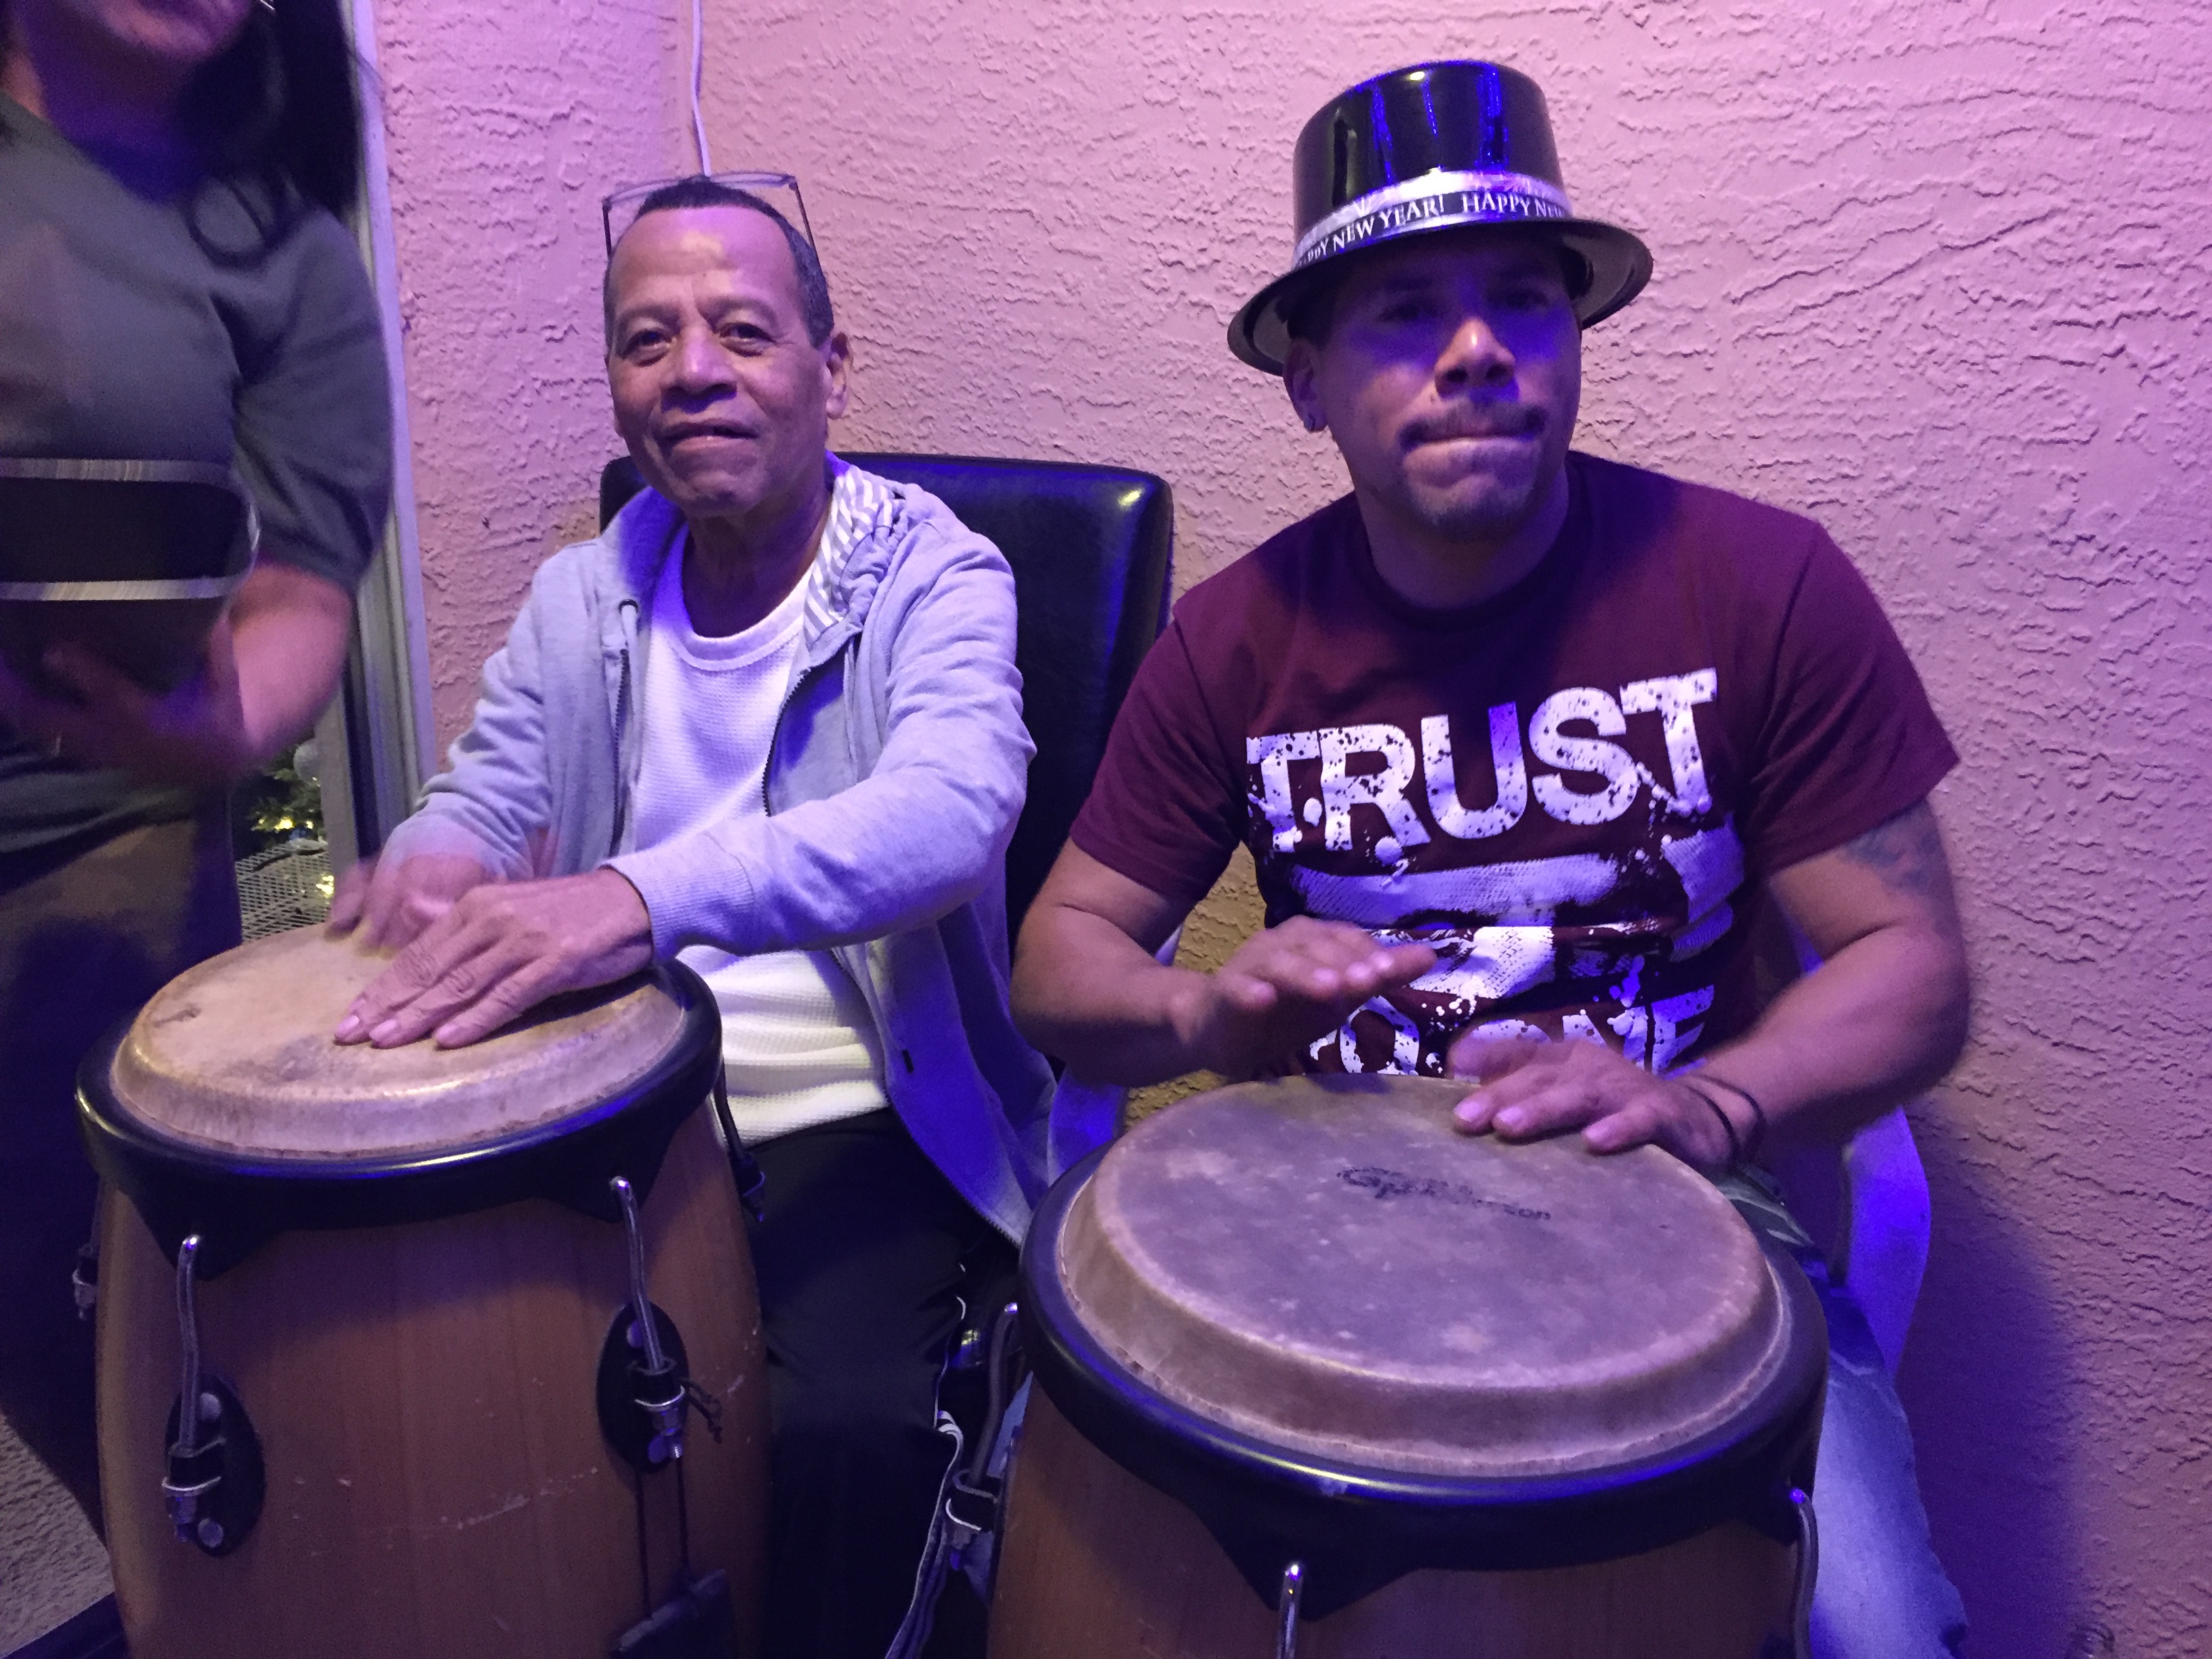 Playing the congas with my dad... love you papi with all my heart, I'll miss you 